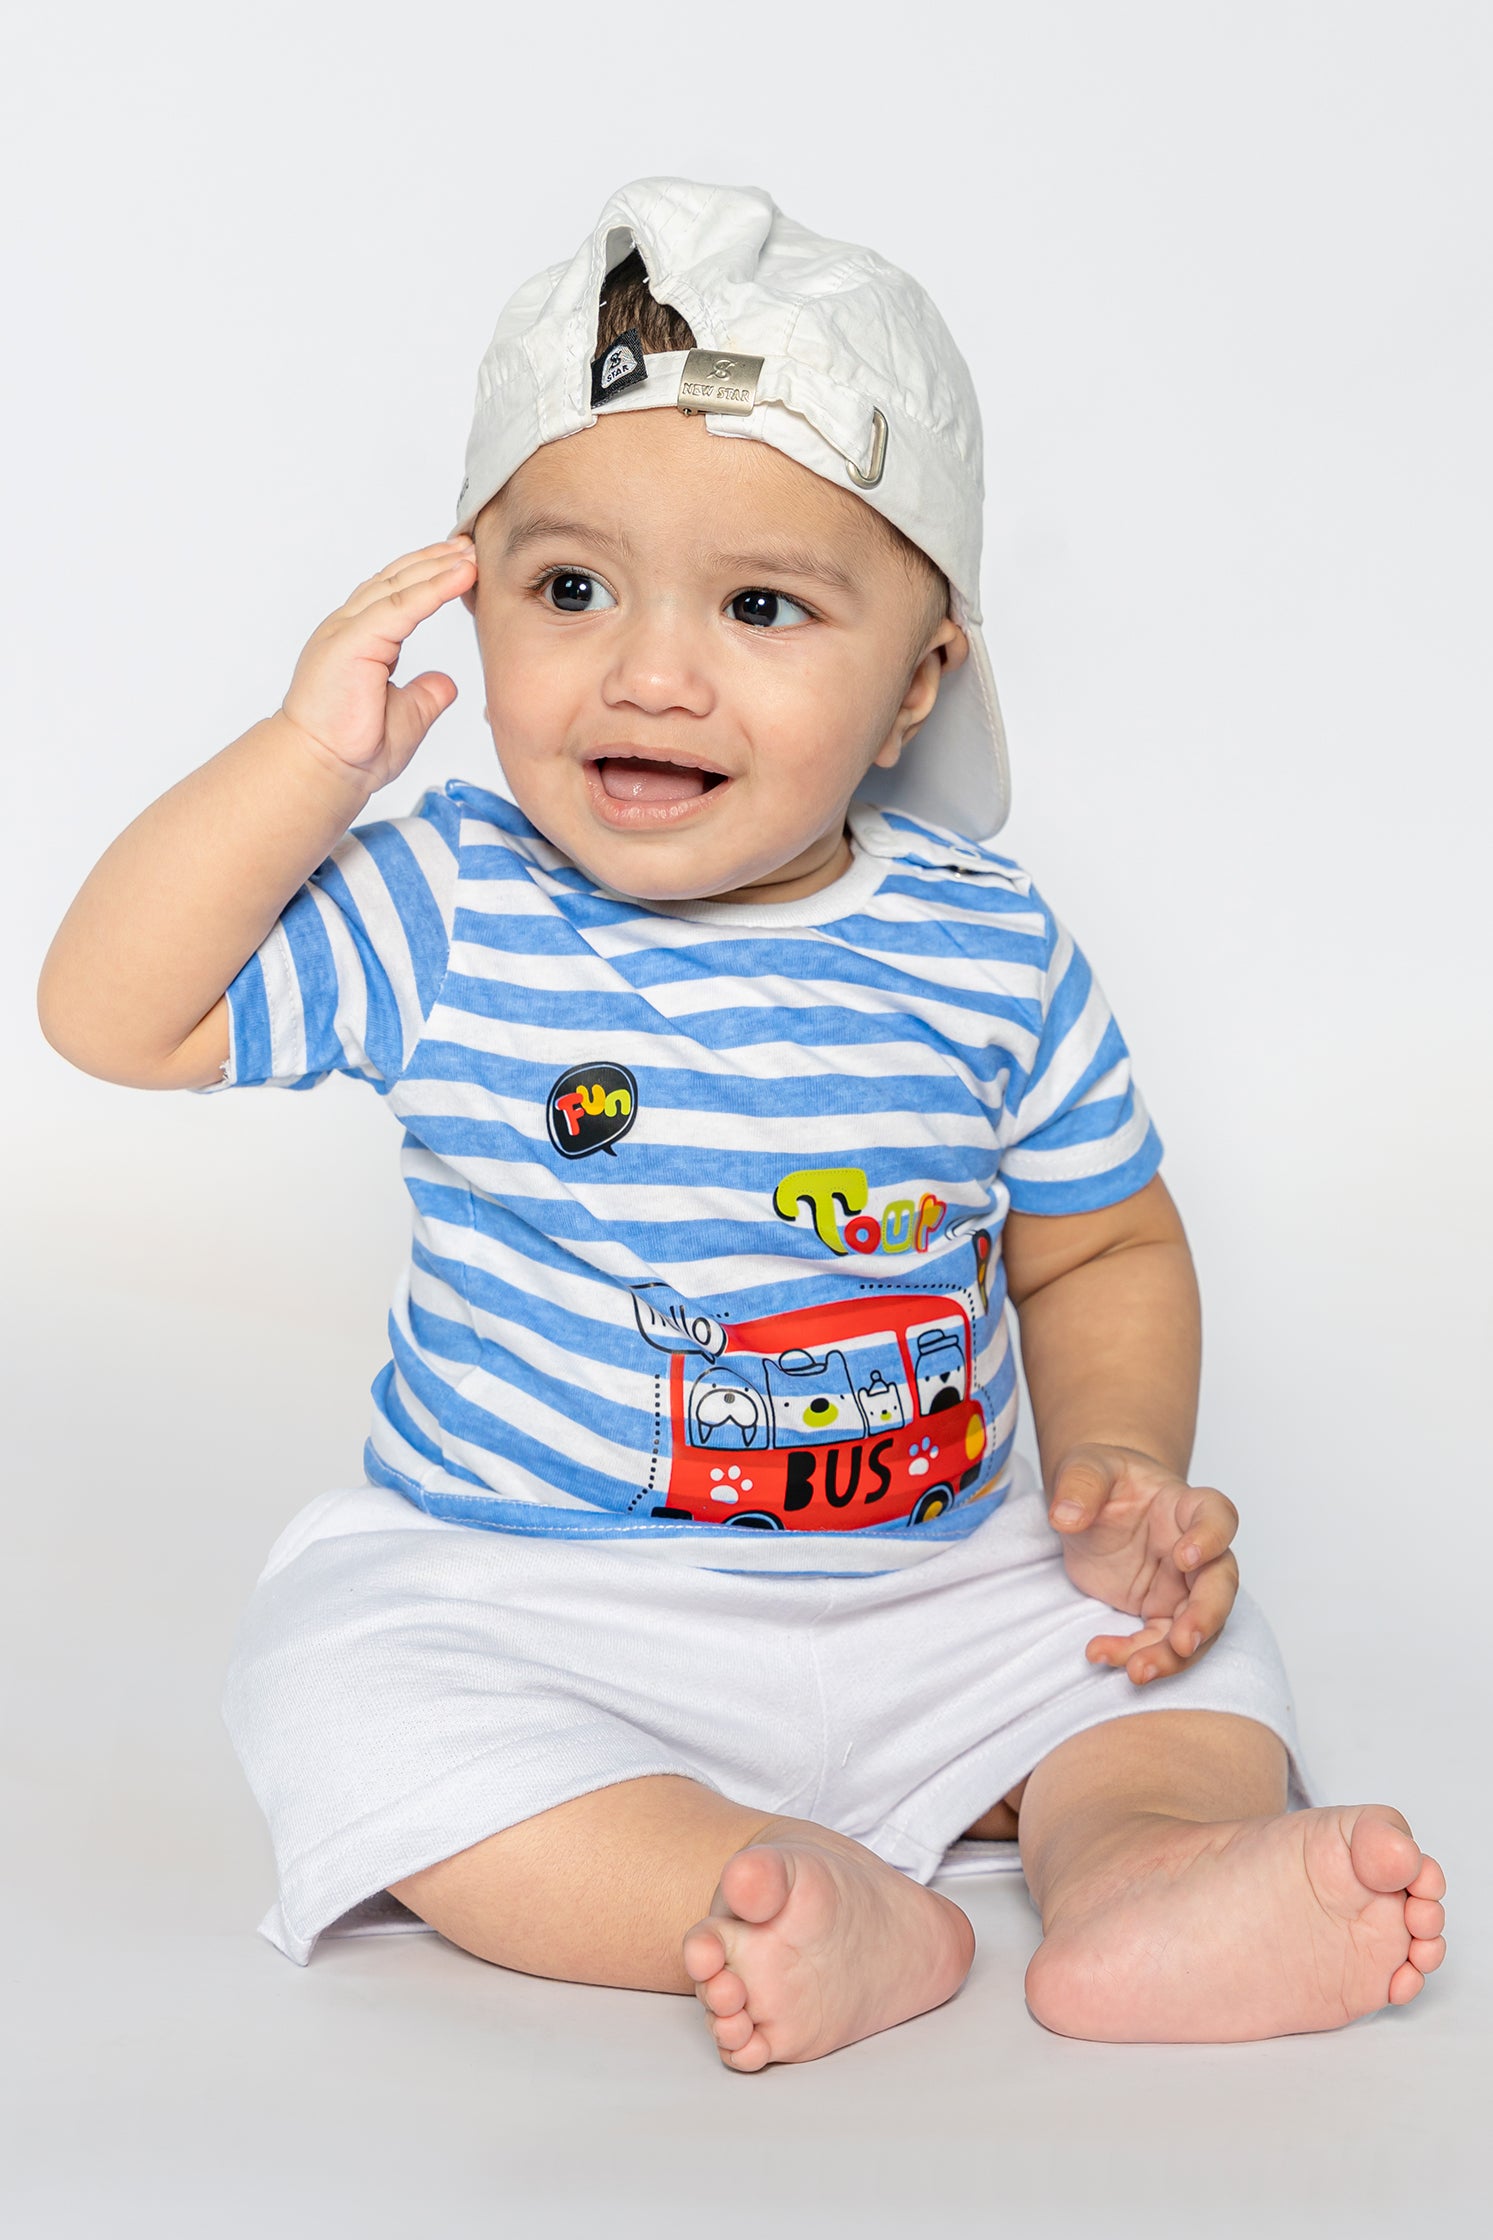 BABY T-SHIRT BLUE FRONT "BUS" PRINTING